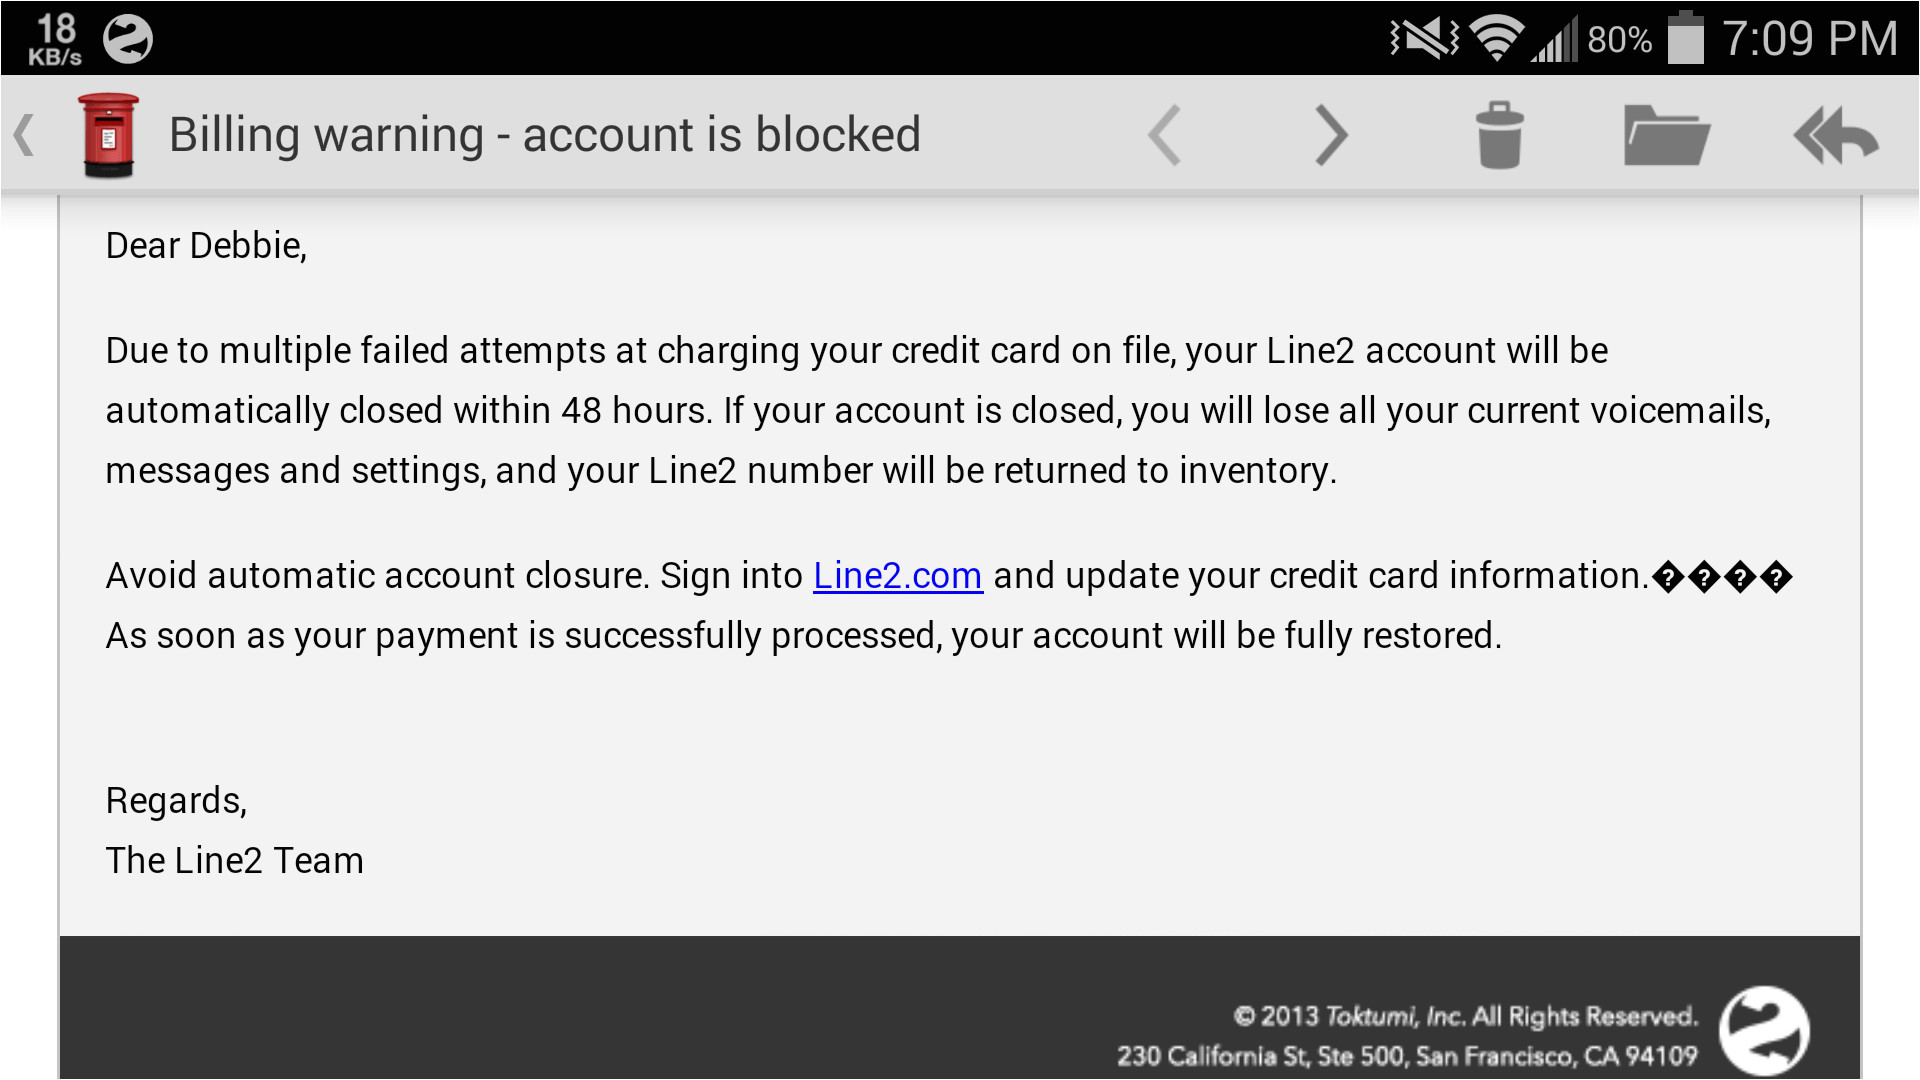 line2s credit card declined email heavy handed